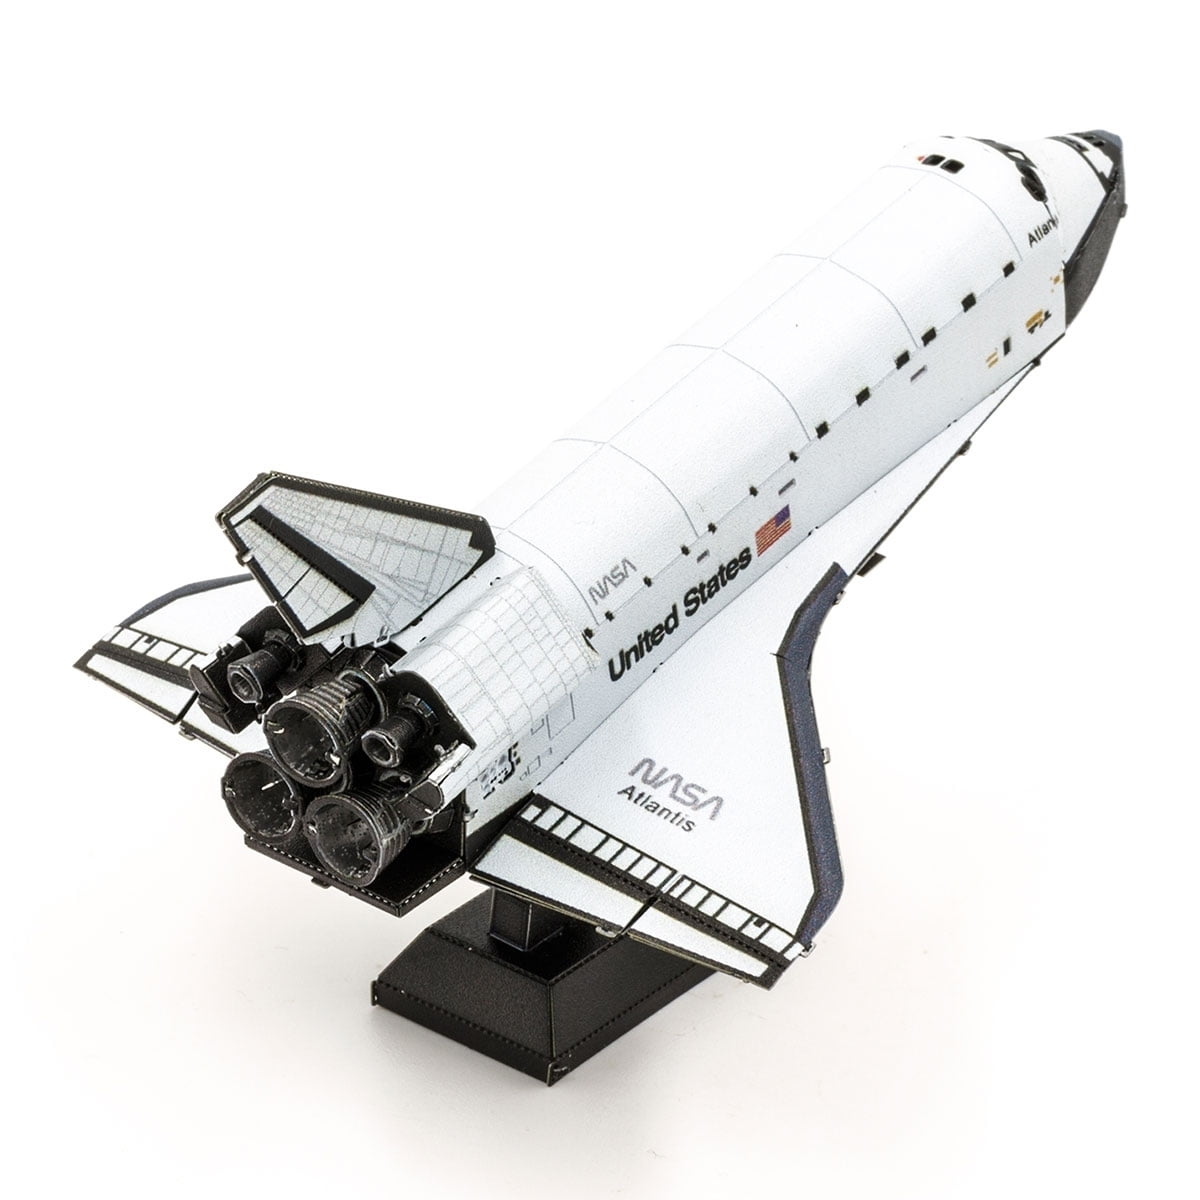 Fascinations Metal Earth NASA Space Shuttle Discovery Collectible 3D Model 